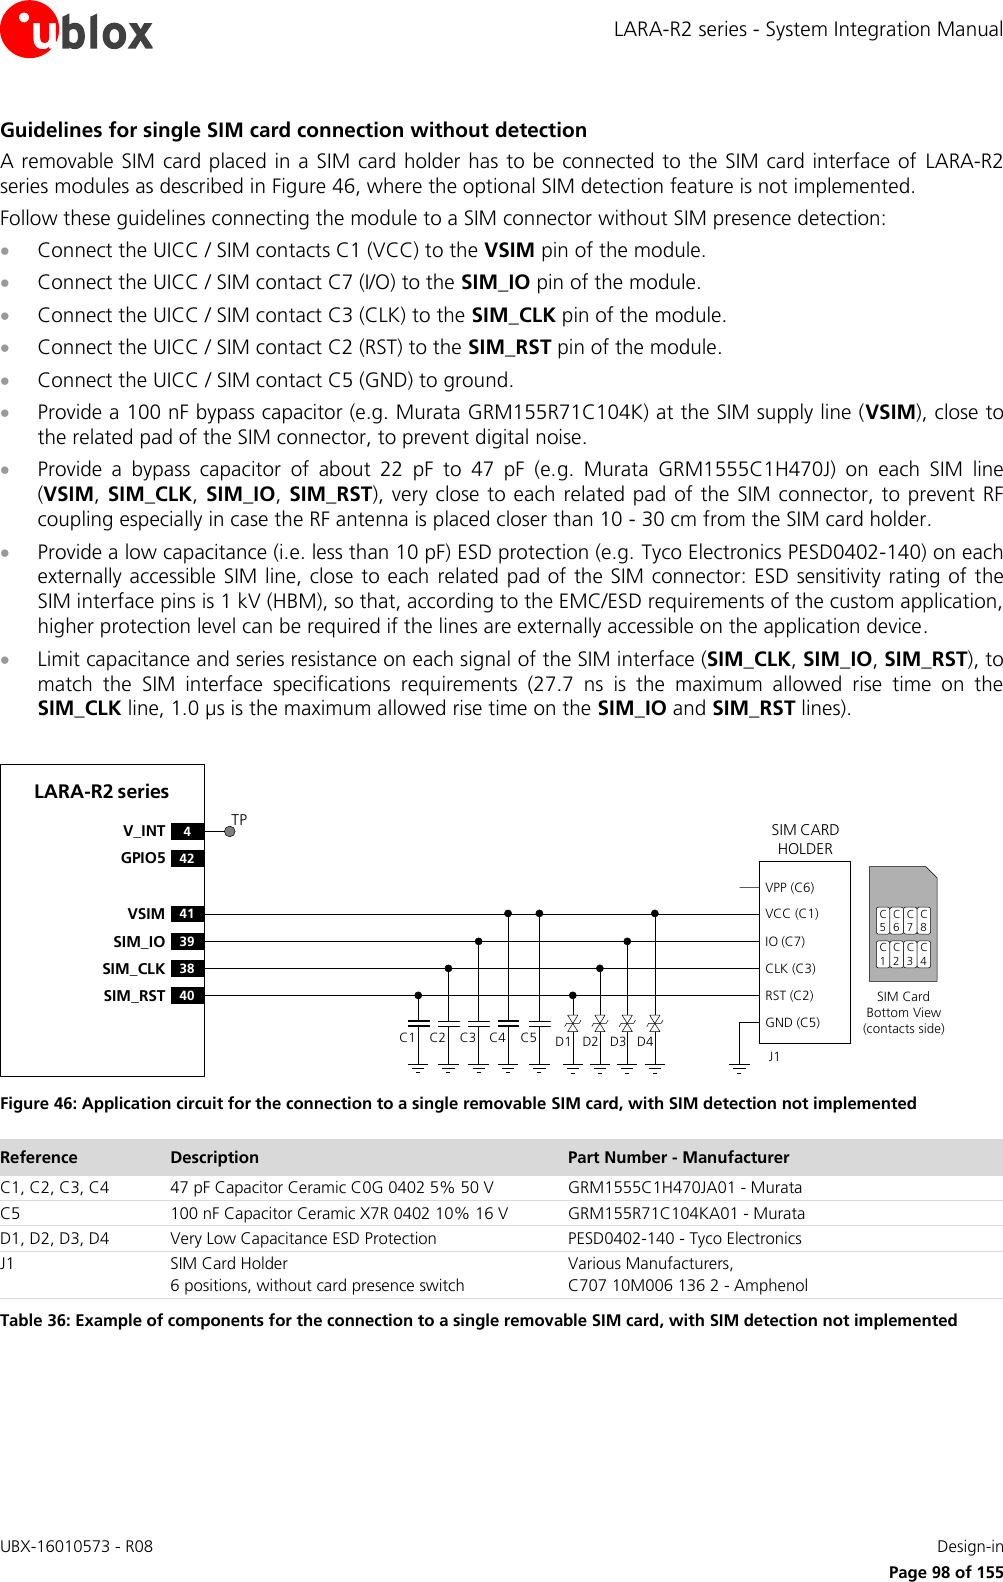 LARA-R2 series - System Integration Manual UBX-16010573 - R08    Design-in     Page 98 of 155 Guidelines for single SIM card connection without detection A removable SIM card placed in a SIM card holder has to be connected to the SIM card interface of  LARA-R2 series modules as described in Figure 46, where the optional SIM detection feature is not implemented. Follow these guidelines connecting the module to a SIM connector without SIM presence detection:  Connect the UICC / SIM contacts C1 (VCC) to the VSIM pin of the module.  Connect the UICC / SIM contact C7 (I/O) to the SIM_IO pin of the module.  Connect the UICC / SIM contact C3 (CLK) to the SIM_CLK pin of the module.  Connect the UICC / SIM contact C2 (RST) to the SIM_RST pin of the module.  Connect the UICC / SIM contact C5 (GND) to ground.  Provide a 100 nF bypass capacitor (e.g. Murata GRM155R71C104K) at the SIM supply line (VSIM), close to the related pad of the SIM connector, to prevent digital noise.  Provide  a  bypass  capacitor  of  about  22  pF  to  47  pF  (e.g.  Murata  GRM1555C1H470J)  on  each  SIM  line (VSIM, SIM_CLK, SIM_IO,  SIM_RST), very close to each related pad of the SIM connector, to prevent RF coupling especially in case the RF antenna is placed closer than 10 - 30 cm from the SIM card holder.  Provide a low capacitance (i.e. less than 10 pF) ESD protection (e.g. Tyco Electronics PESD0402-140) on each externally accessible SIM line, close to each  related pad of the SIM connector: ESD sensitivity rating of the SIM interface pins is 1 kV (HBM), so that, according to the EMC/ESD requirements of the custom application, higher protection level can be required if the lines are externally accessible on the application device.  Limit capacitance and series resistance on each signal of the SIM interface (SIM_CLK, SIM_IO, SIM_RST), to match  the  SIM  interface  specifications  requirements  (27.7  ns  is  the  maximum  allowed  rise  time  on  the SIM_CLK line, 1.0 µs is the maximum allowed rise time on the SIM_IO and SIM_RST lines).  LARA-R2 series41VSIM39SIM_IO38SIM_CLK40SIM_RST4V_INT42GPIO5SIM CARD HOLDERC5C6C7C1C2C3SIM Card Bottom View (contacts side)C1VPP (C6)VCC (C1)IO (C7)CLK (C3)RST (C2)GND (C5)C2 C3 C5J1C4 D1 D2 D3 D4C8C4TP Figure 46: Application circuit for the connection to a single removable SIM card, with SIM detection not implemented Reference Description Part Number - Manufacturer C1, C2, C3, C4 47 pF Capacitor Ceramic C0G 0402 5% 50 V GRM1555C1H470JA01 - Murata C5 100 nF Capacitor Ceramic X7R 0402 10% 16 V GRM155R71C104KA01 - Murata D1, D2, D3, D4 Very Low Capacitance ESD Protection PESD0402-140 - Tyco Electronics  J1 SIM Card Holder 6 positions, without card presence switch Various Manufacturers, C707 10M006 136 2 - Amphenol Table 36: Example of components for the connection to a single removable SIM card, with SIM detection not implemented  